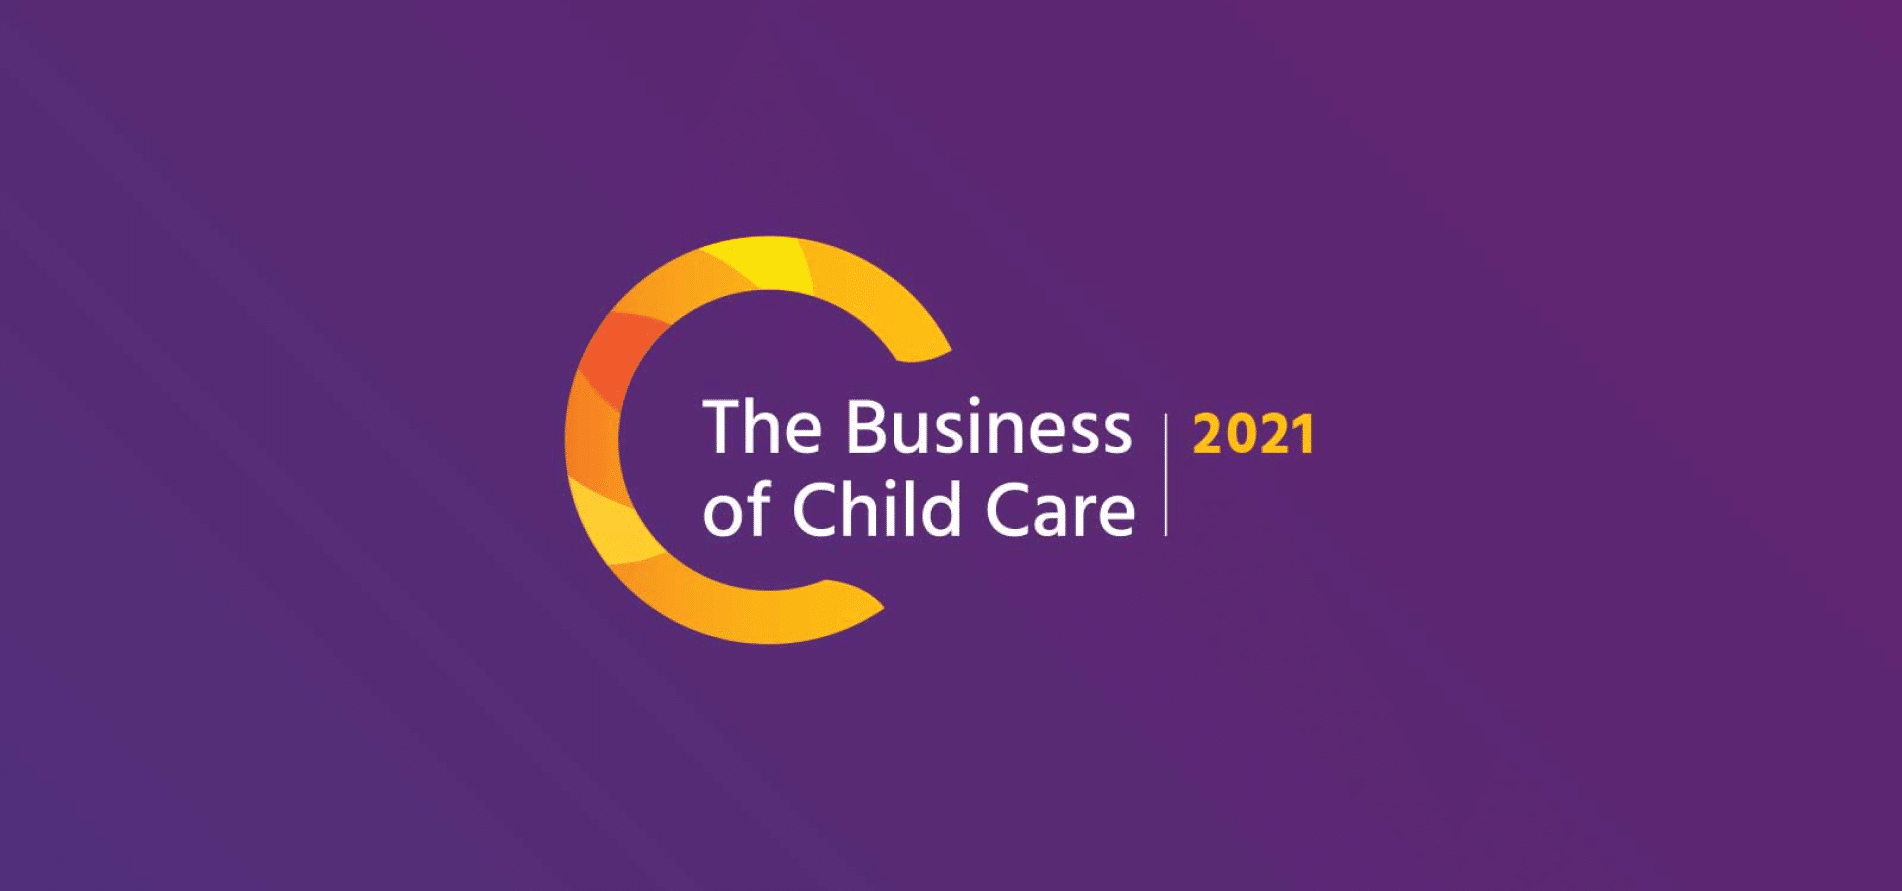 Graphic element with text reading The Business of Child Care 2021